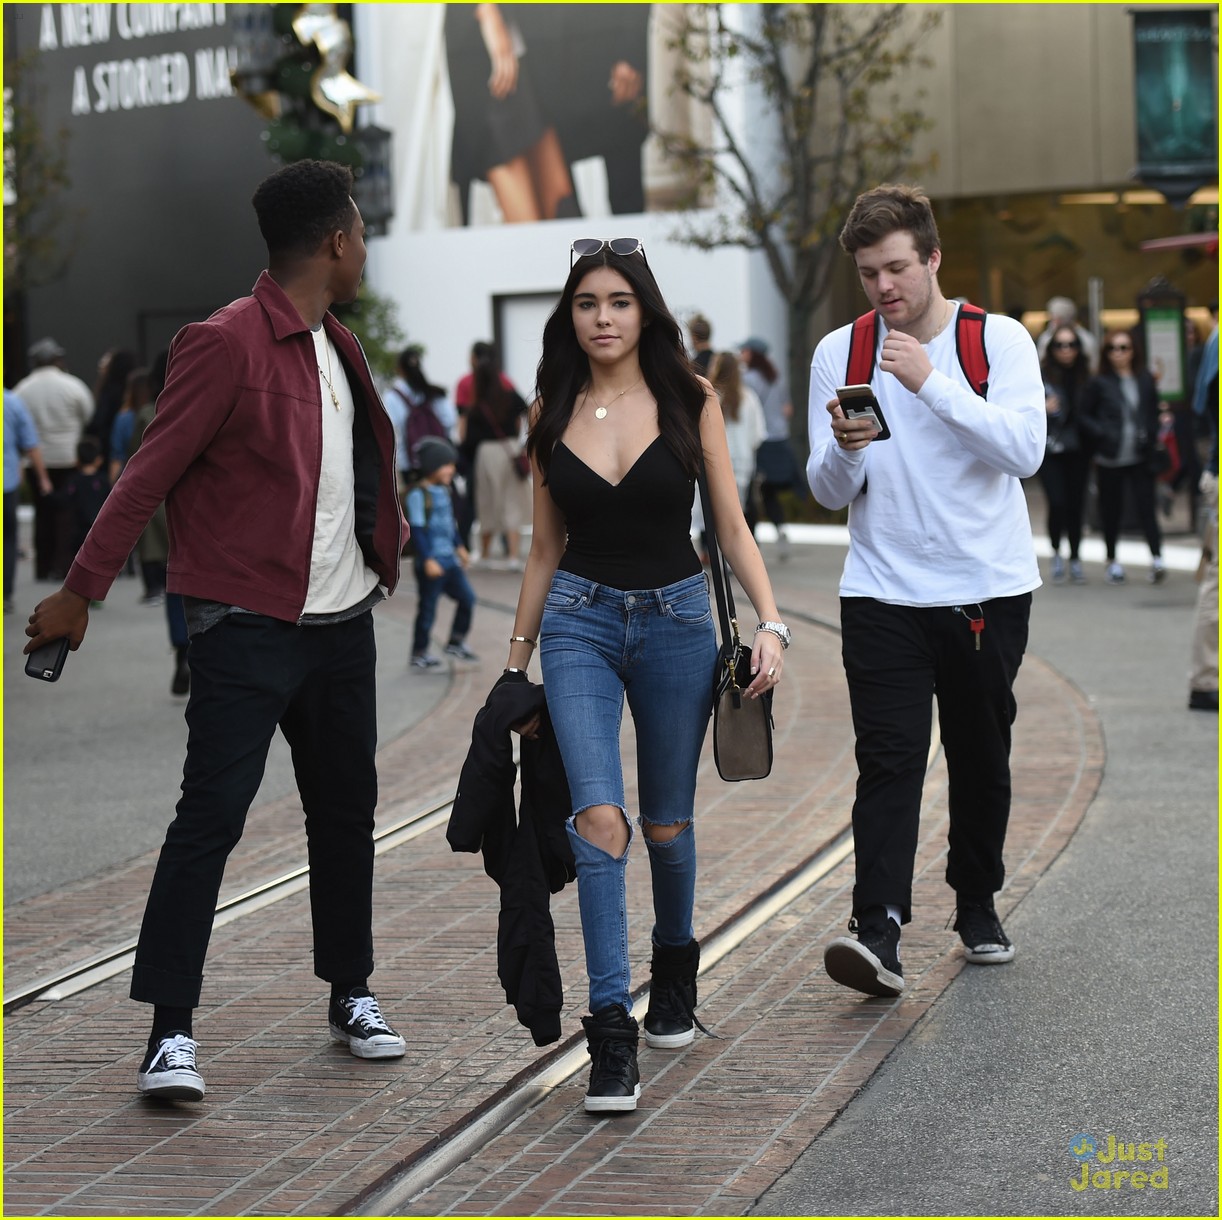 madison beer grove shopping song qa answer fans 09